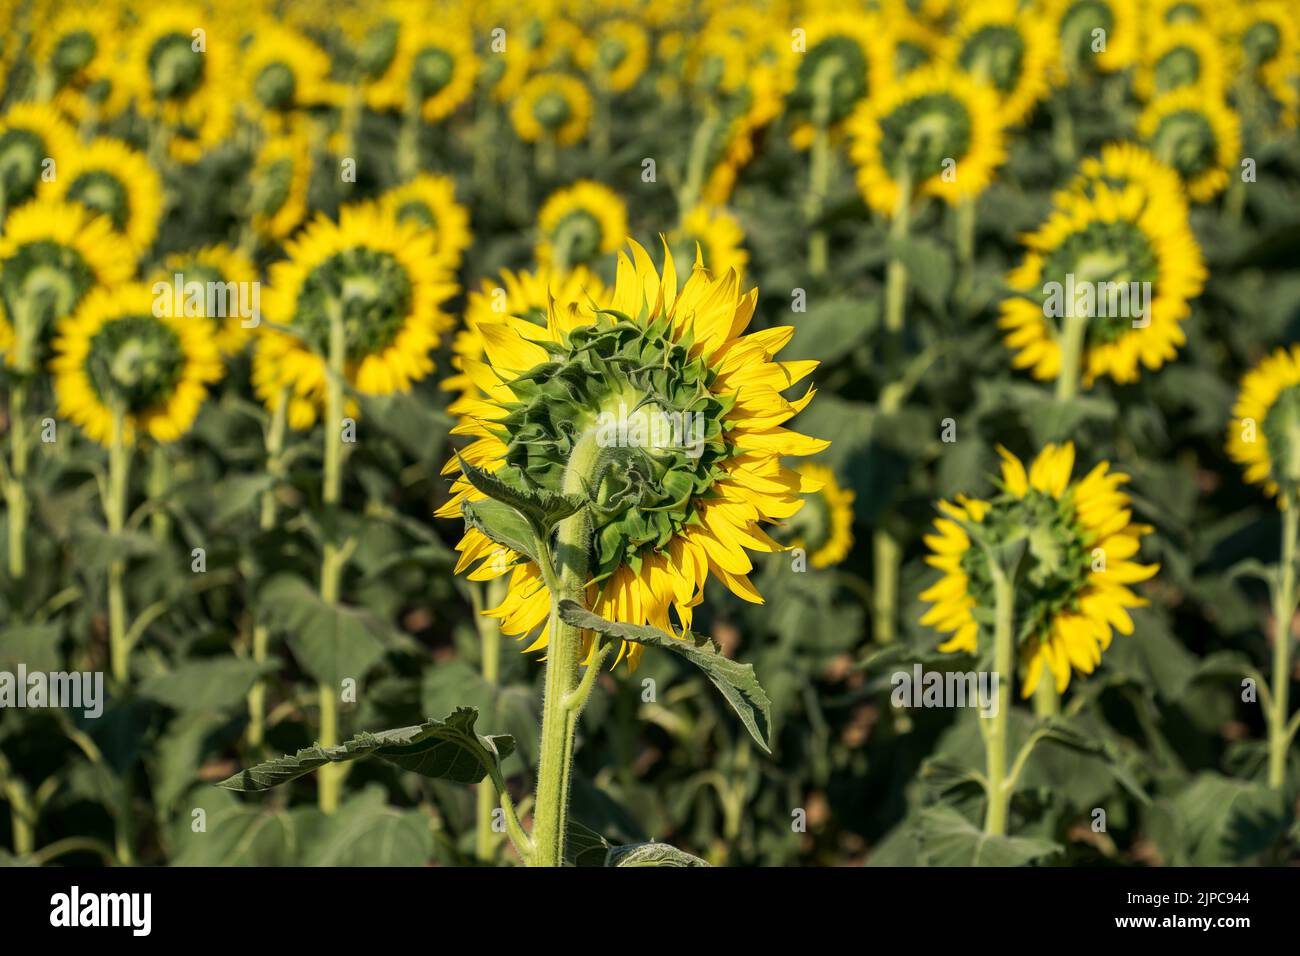 Soft focus rear view of fresh sunflowers with green leaves and vivid yellow petals growing in field on farmland Stock Photo